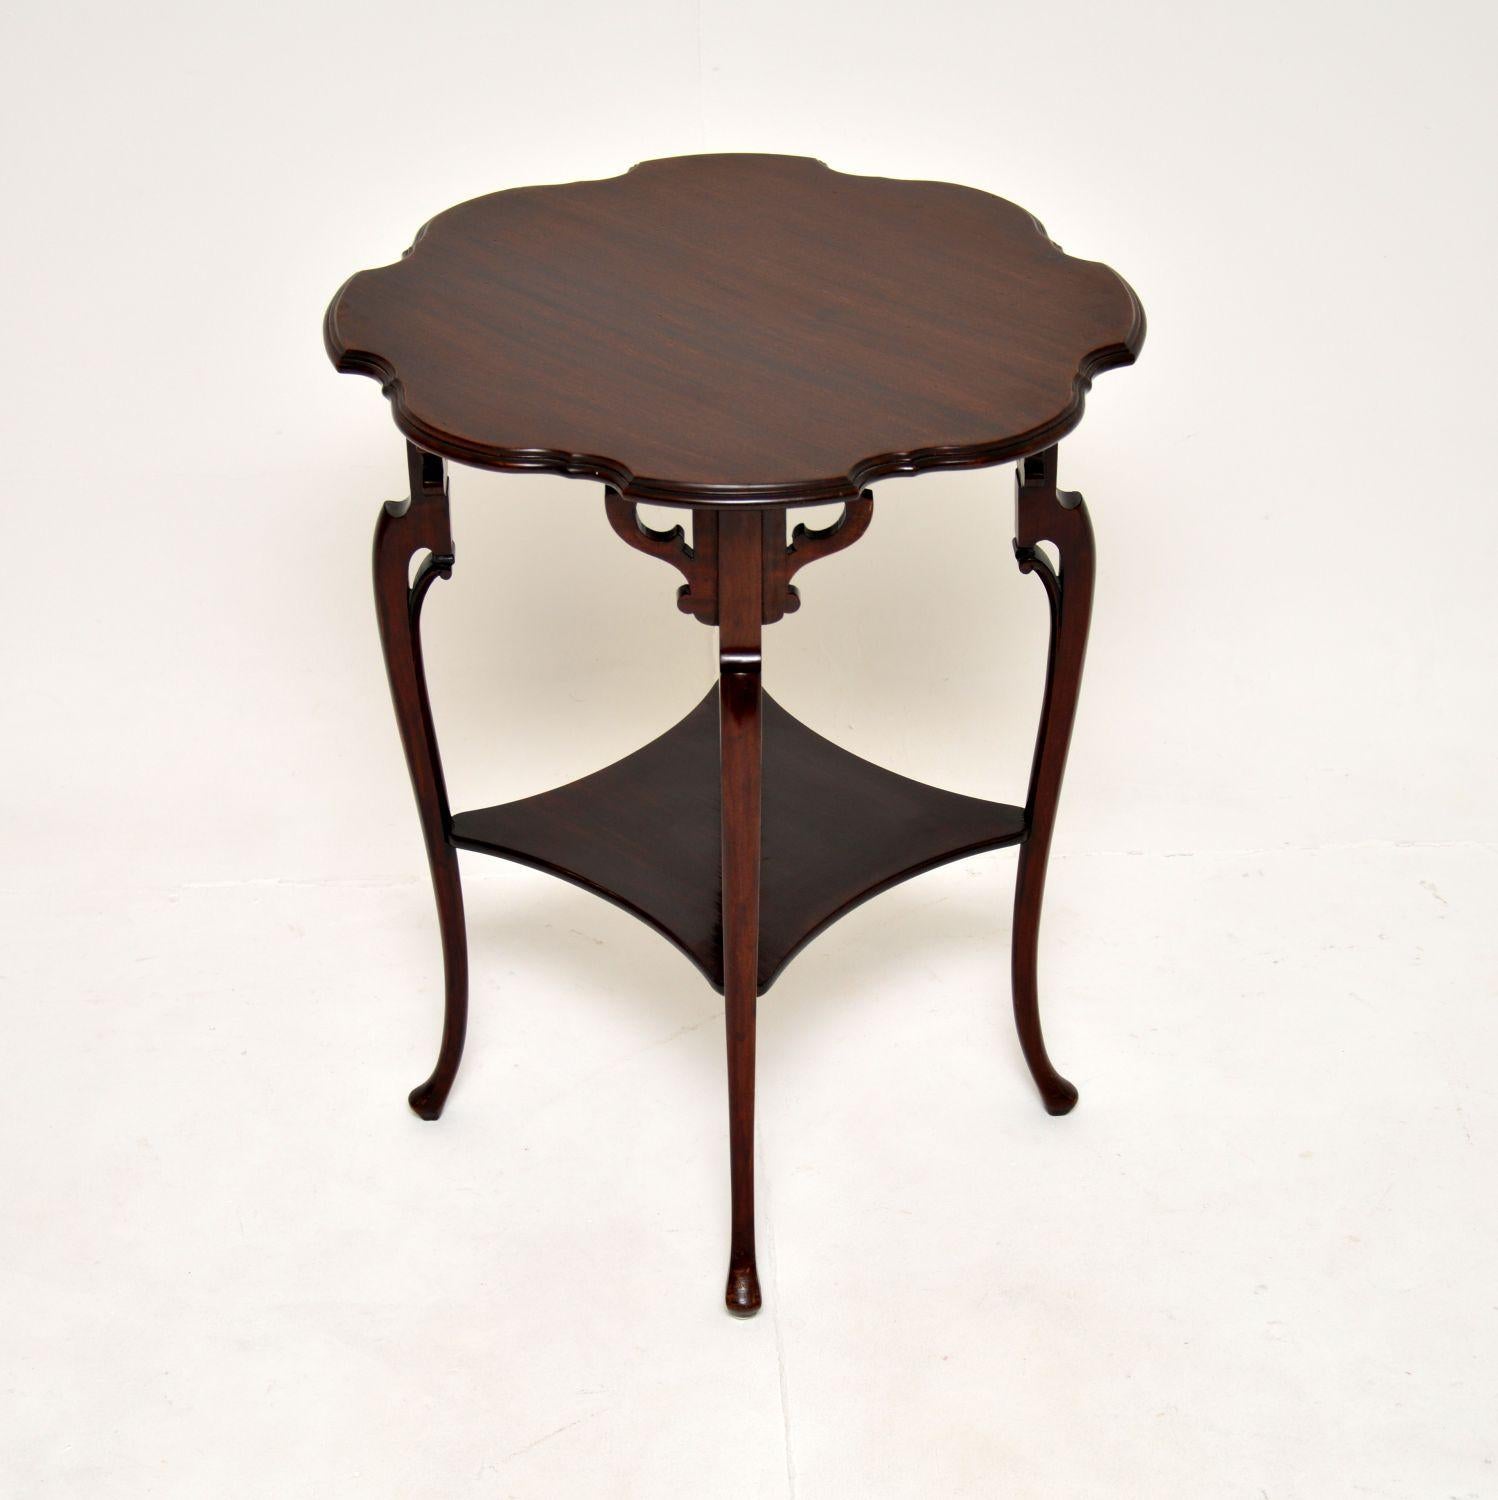 British Antique Edwardian Occasional Side Table